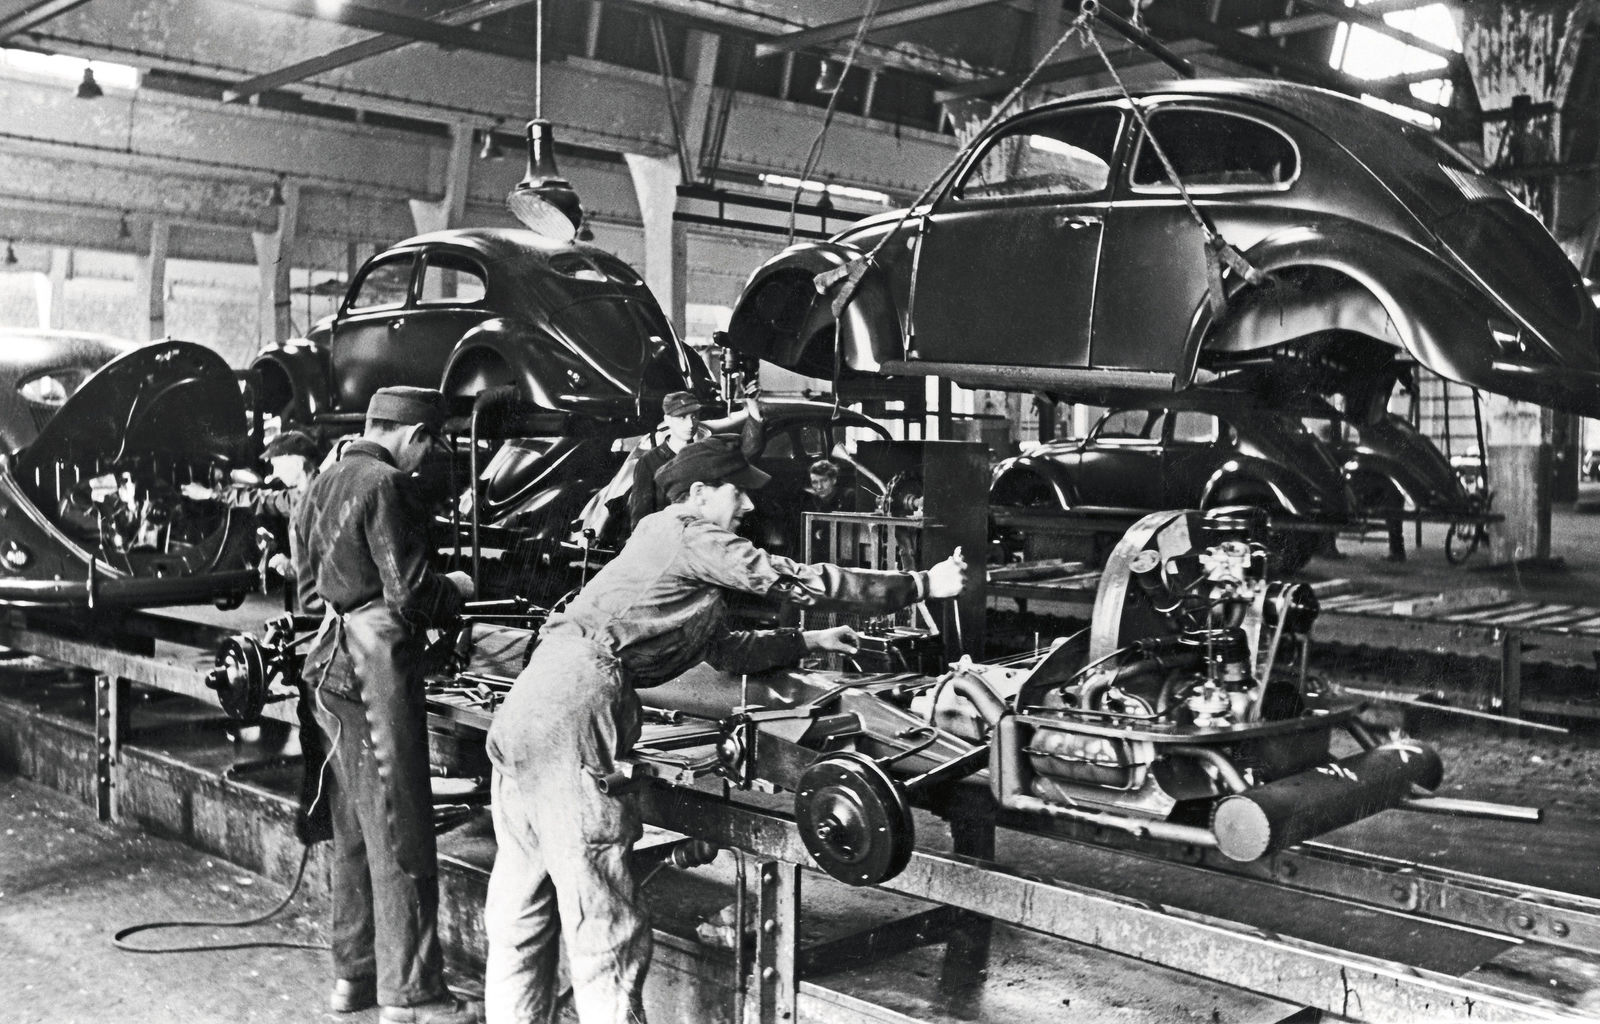 75 years ago in Wolfsburg: Start of series production of the Volkswagen Beetle